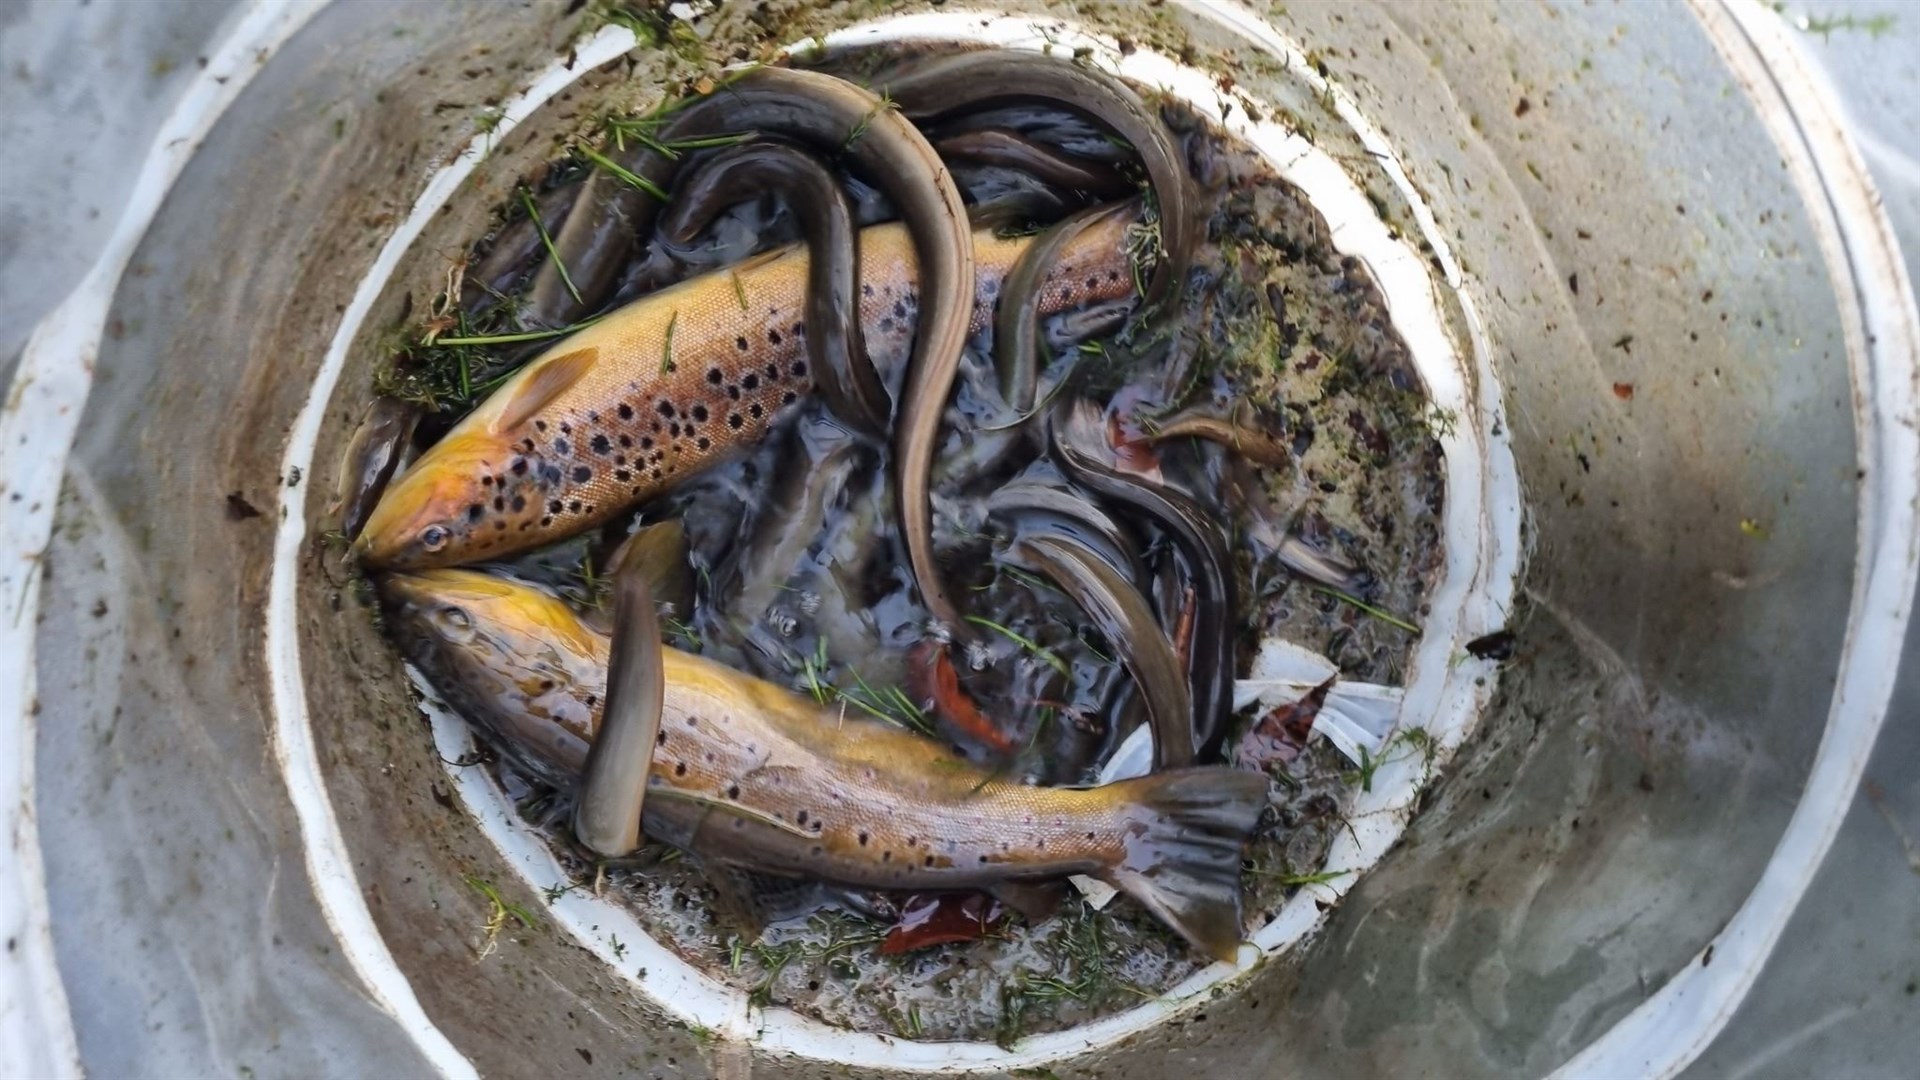 Part of the catch on day two included brown trout ready for spawning. They have a better chance of finding spawning habitat in the river than in the pond.